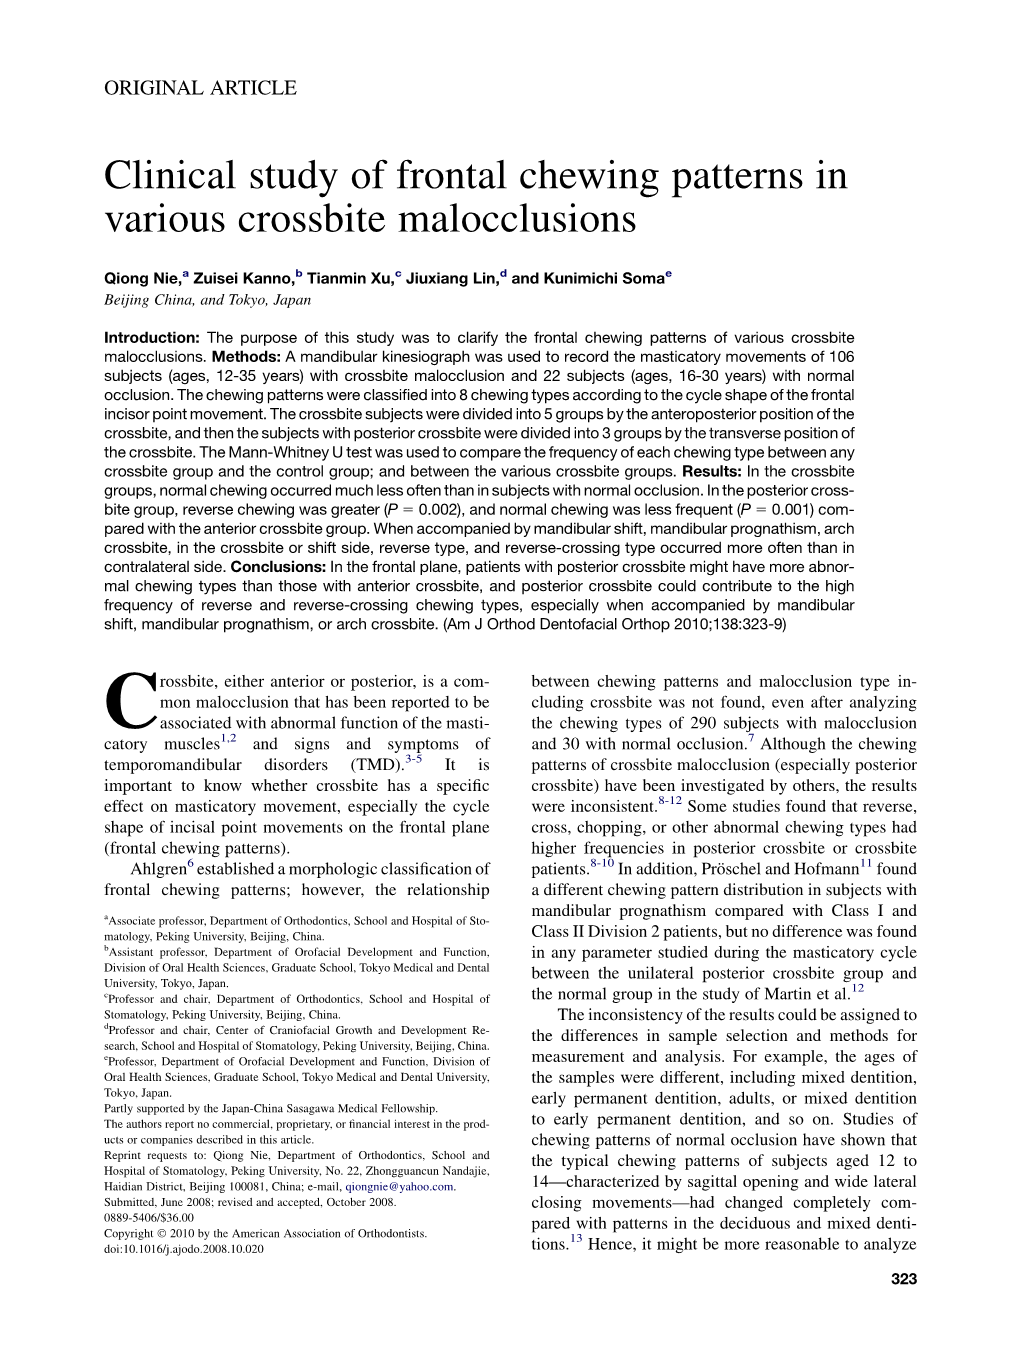 Clinical Study of Frontal Chewing Patterns in Various Crossbite Malocclusions